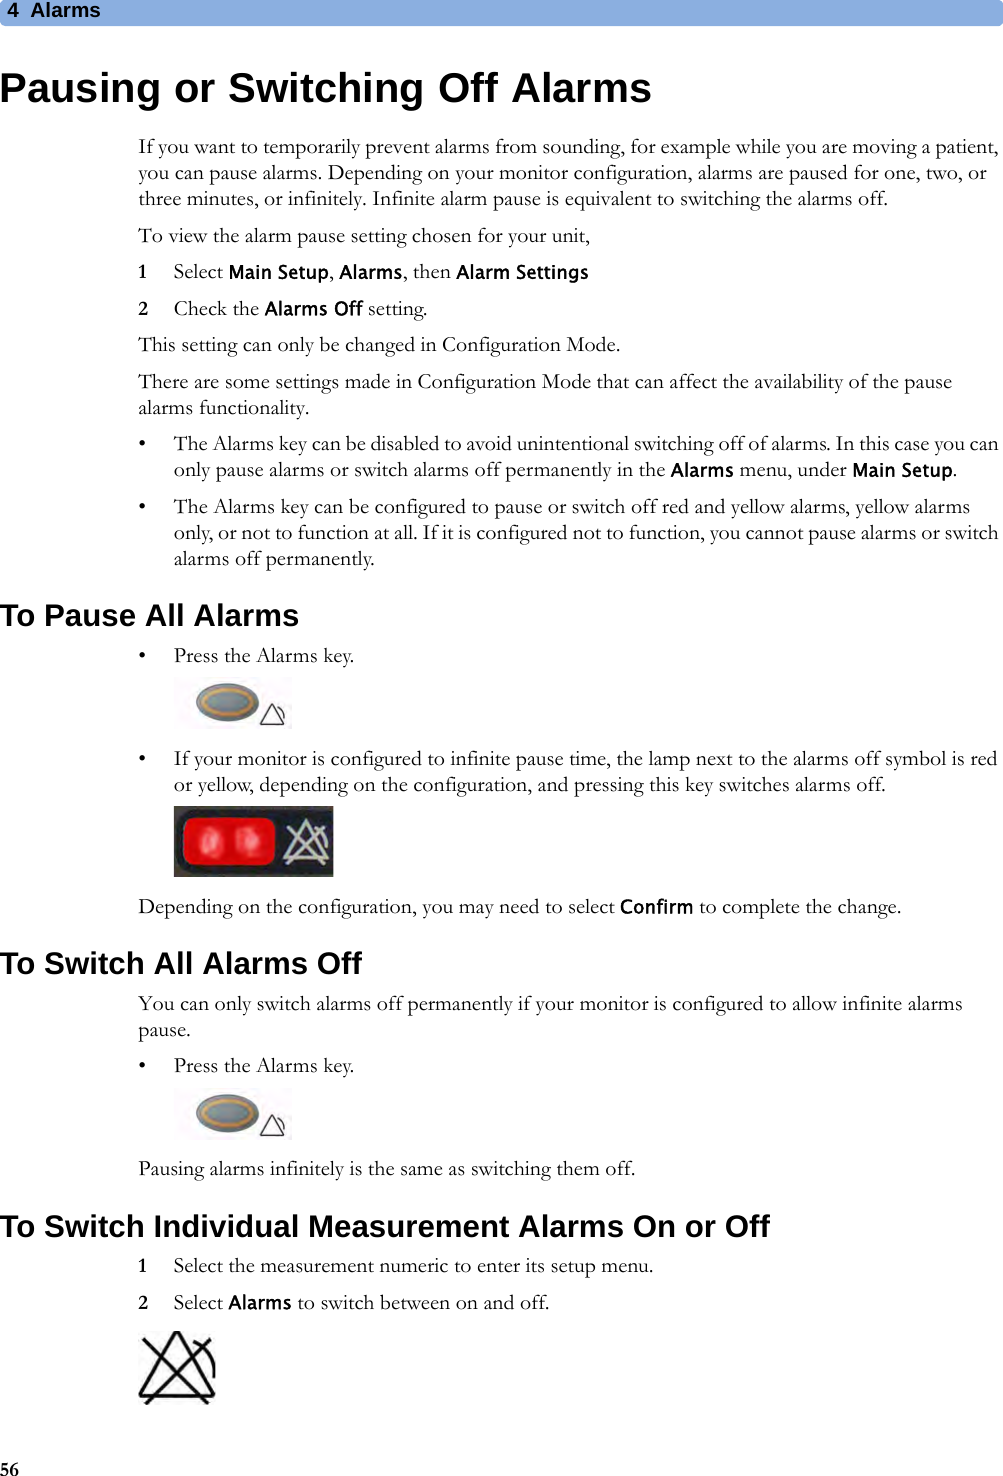 4 Alarms56Pausing or Switching Off AlarmsIf you want to temporarily prevent alarms from sounding, for example while you are moving a patient, you can pause alarms. Depending on your monitor configuration, alarms are paused for one, two, or three minutes, or infinitely. Infinite alarm pause is equivalent to switching the alarms off.To view the alarm pause setting chosen for your unit,1Select Main Setup, Alarms, then Alarm Settings2Check the Alarms Off setting.This setting can only be changed in Configuration Mode.There are some settings made in Configuration Mode that can affect the availability of the pause alarms functionality.• The Alarms key can be disabled to avoid unintentional switching off of alarms. In this case you can only pause alarms or switch alarms off permanently in the Alarms menu, under Main Setup.• The Alarms key can be configured to pause or switch off red and yellow alarms, yellow alarms only, or not to function at all. If it is configured not to function, you cannot pause alarms or switch alarms off permanently.To Pause All Alarms• Press the Alarms key. • If your monitor is configured to infinite pause time, the lamp next to the alarms off symbol is red or yellow, depending on the configuration, and pressing this key switches alarms off.Depending on the configuration, you may need to select Confirm to complete the change.To Switch All Alarms OffYou can only switch alarms off permanently if your monitor is configured to allow infinite alarms pause.• Press the Alarms key.Pausing alarms infinitely is the same as switching them off.To Switch Individual Measurement Alarms On or Off1Select the measurement numeric to enter its setup menu.2Select Alarms to switch between on and off.